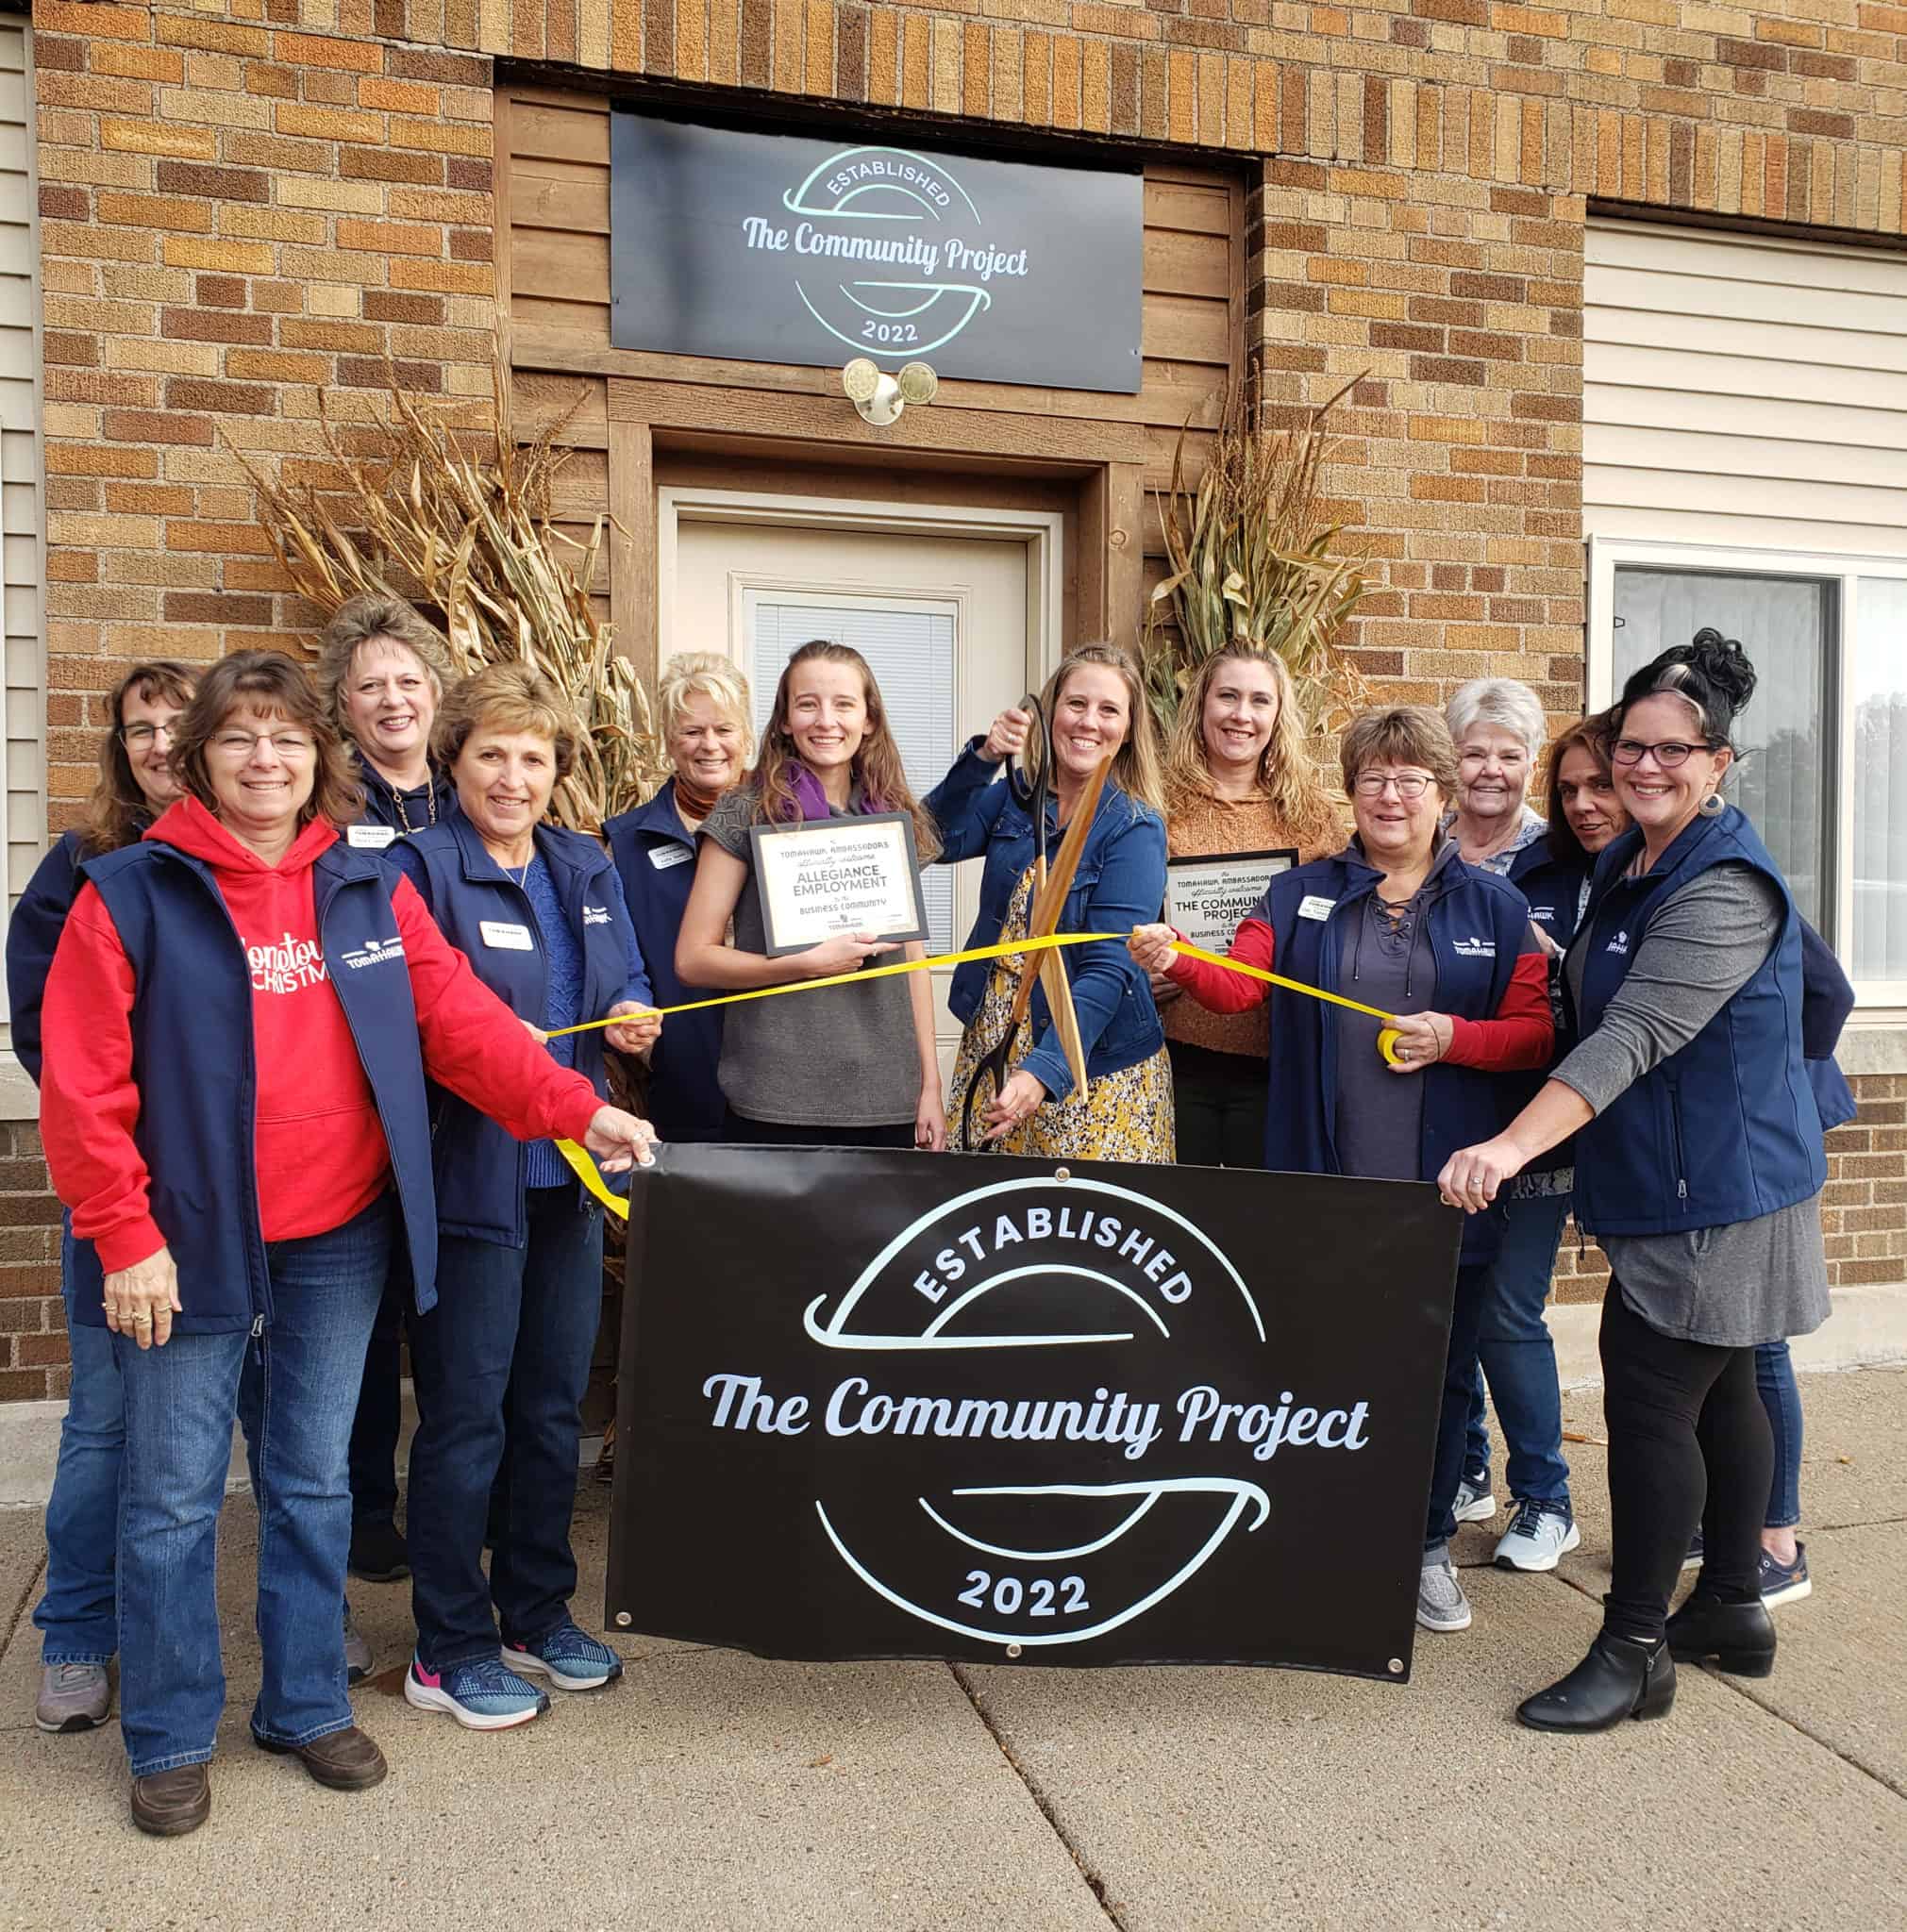 Three new businesses welcomed to Tomahawk community by Chamber Ambassadors